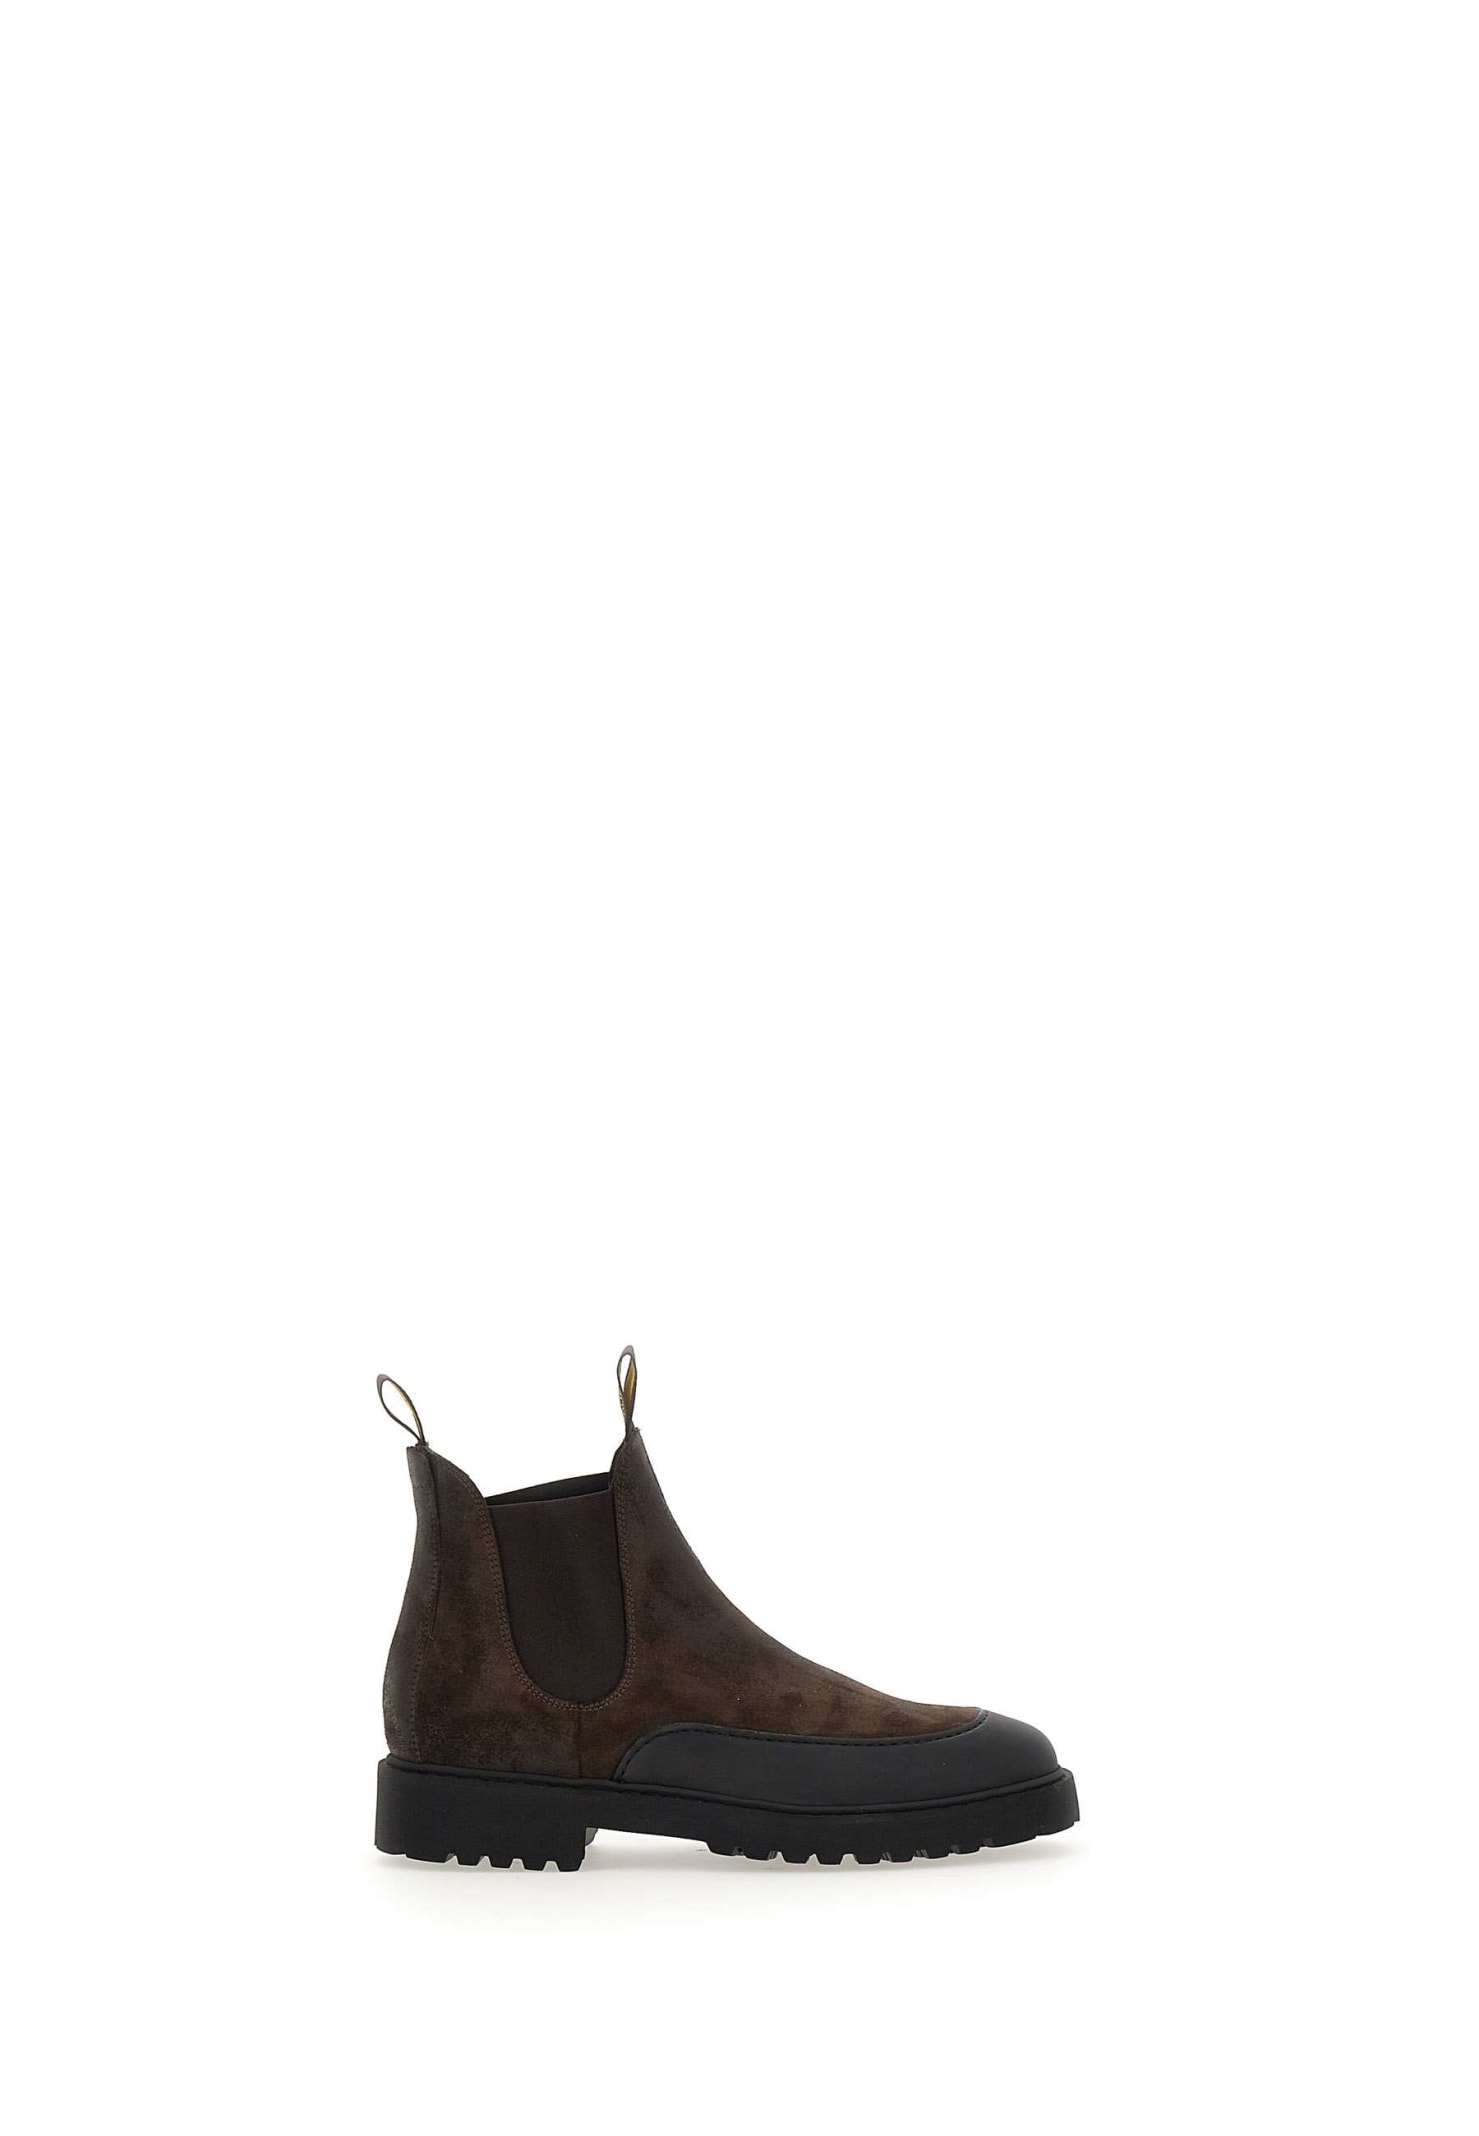 Doucal's Doucals hummel Coated Suede Boot